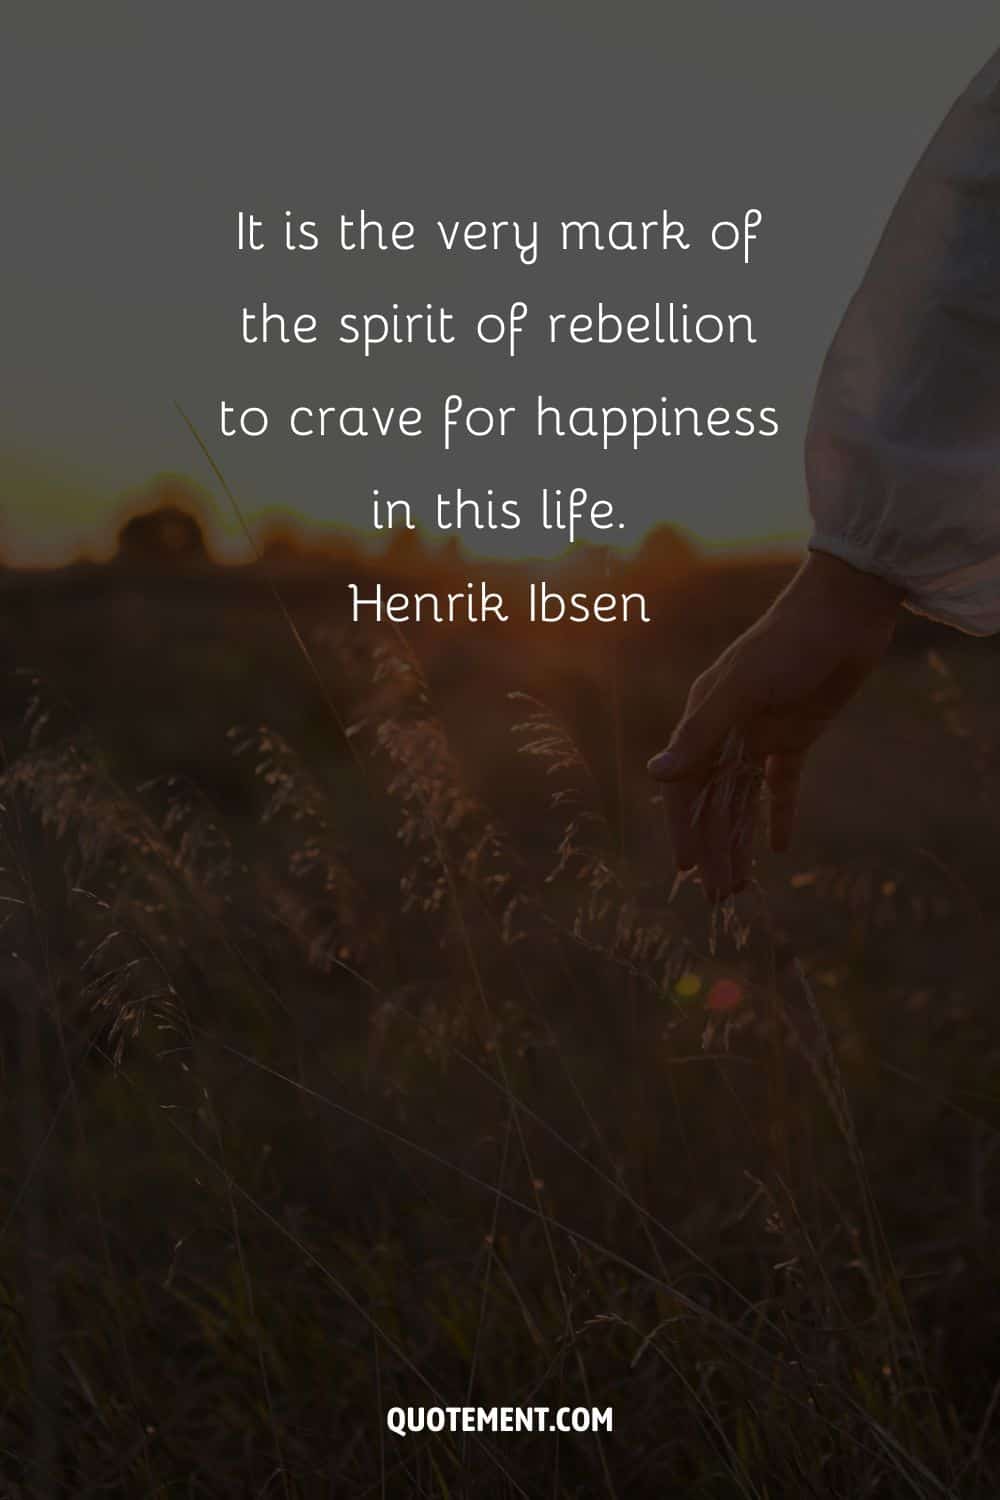 It is the very mark of the spirit of rebellion to crave for happiness in this life. – Henrik Ibsen.